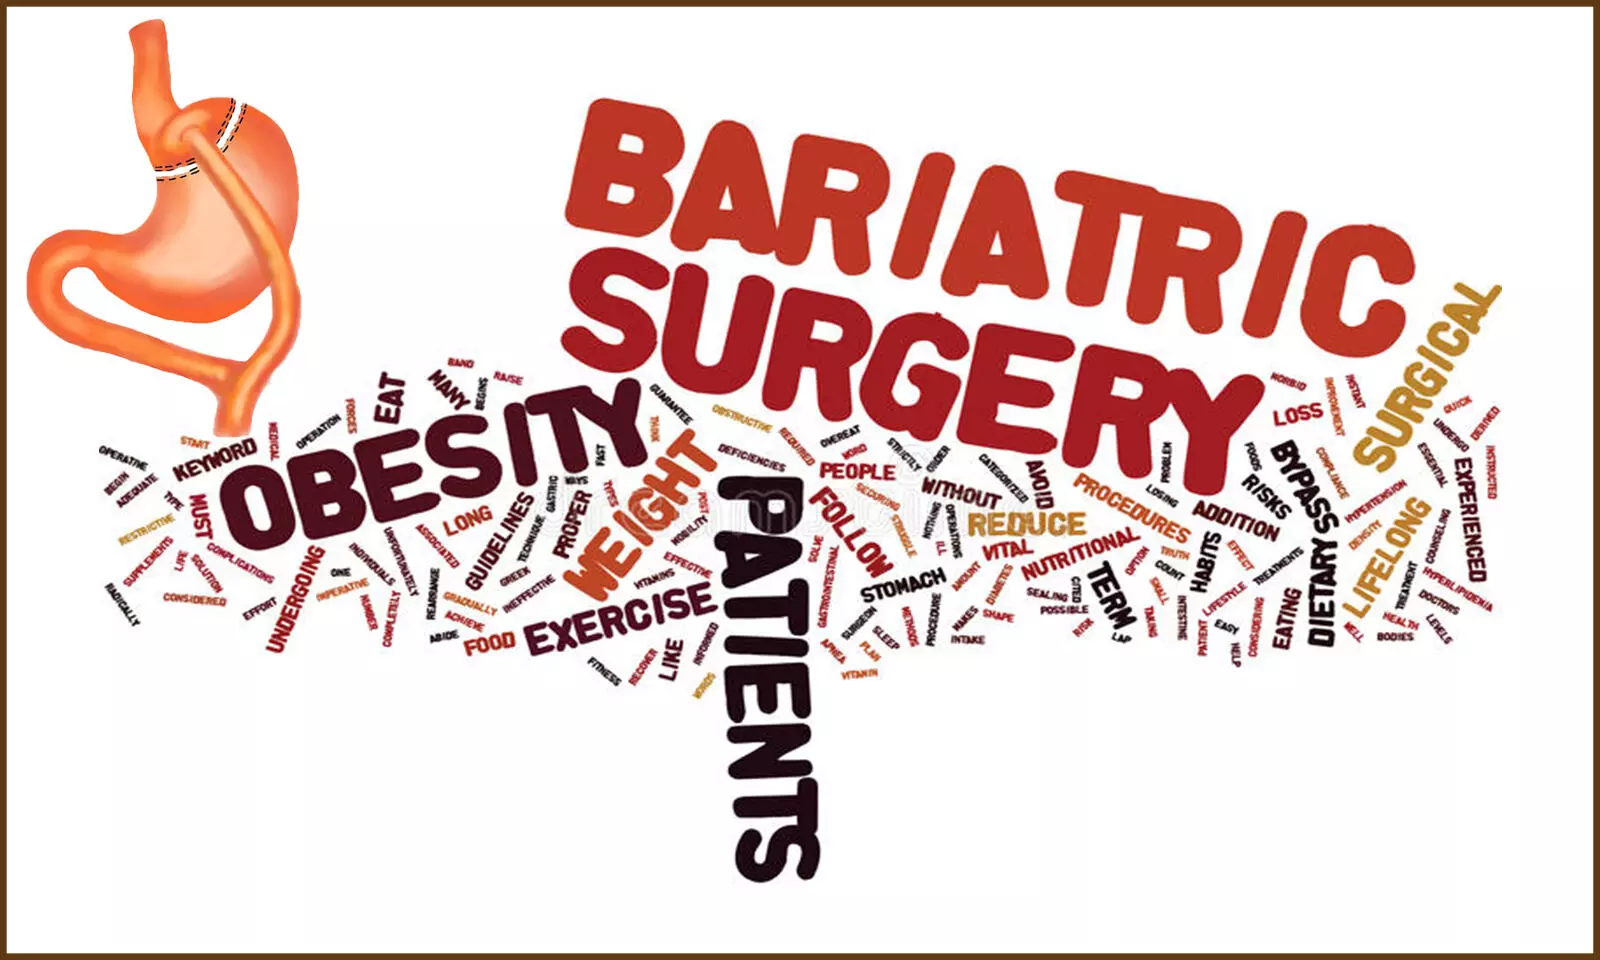 Bariatric surgery may significantly reduce CVD risk in obese teens with diabetes